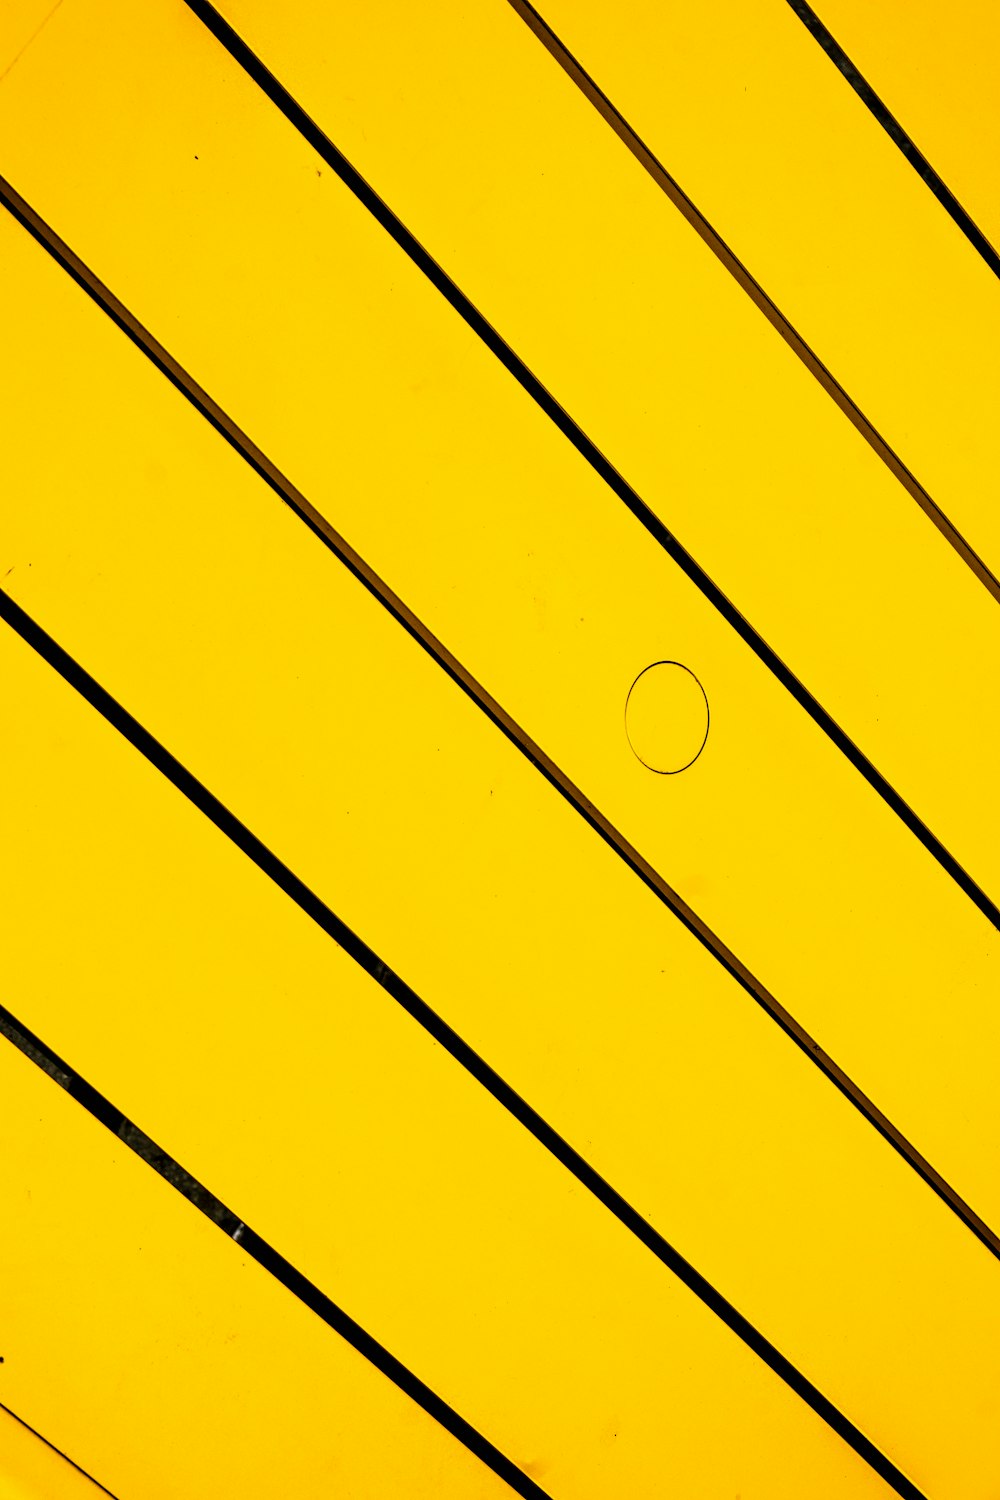 a close up of a telephone pole with a yellow background